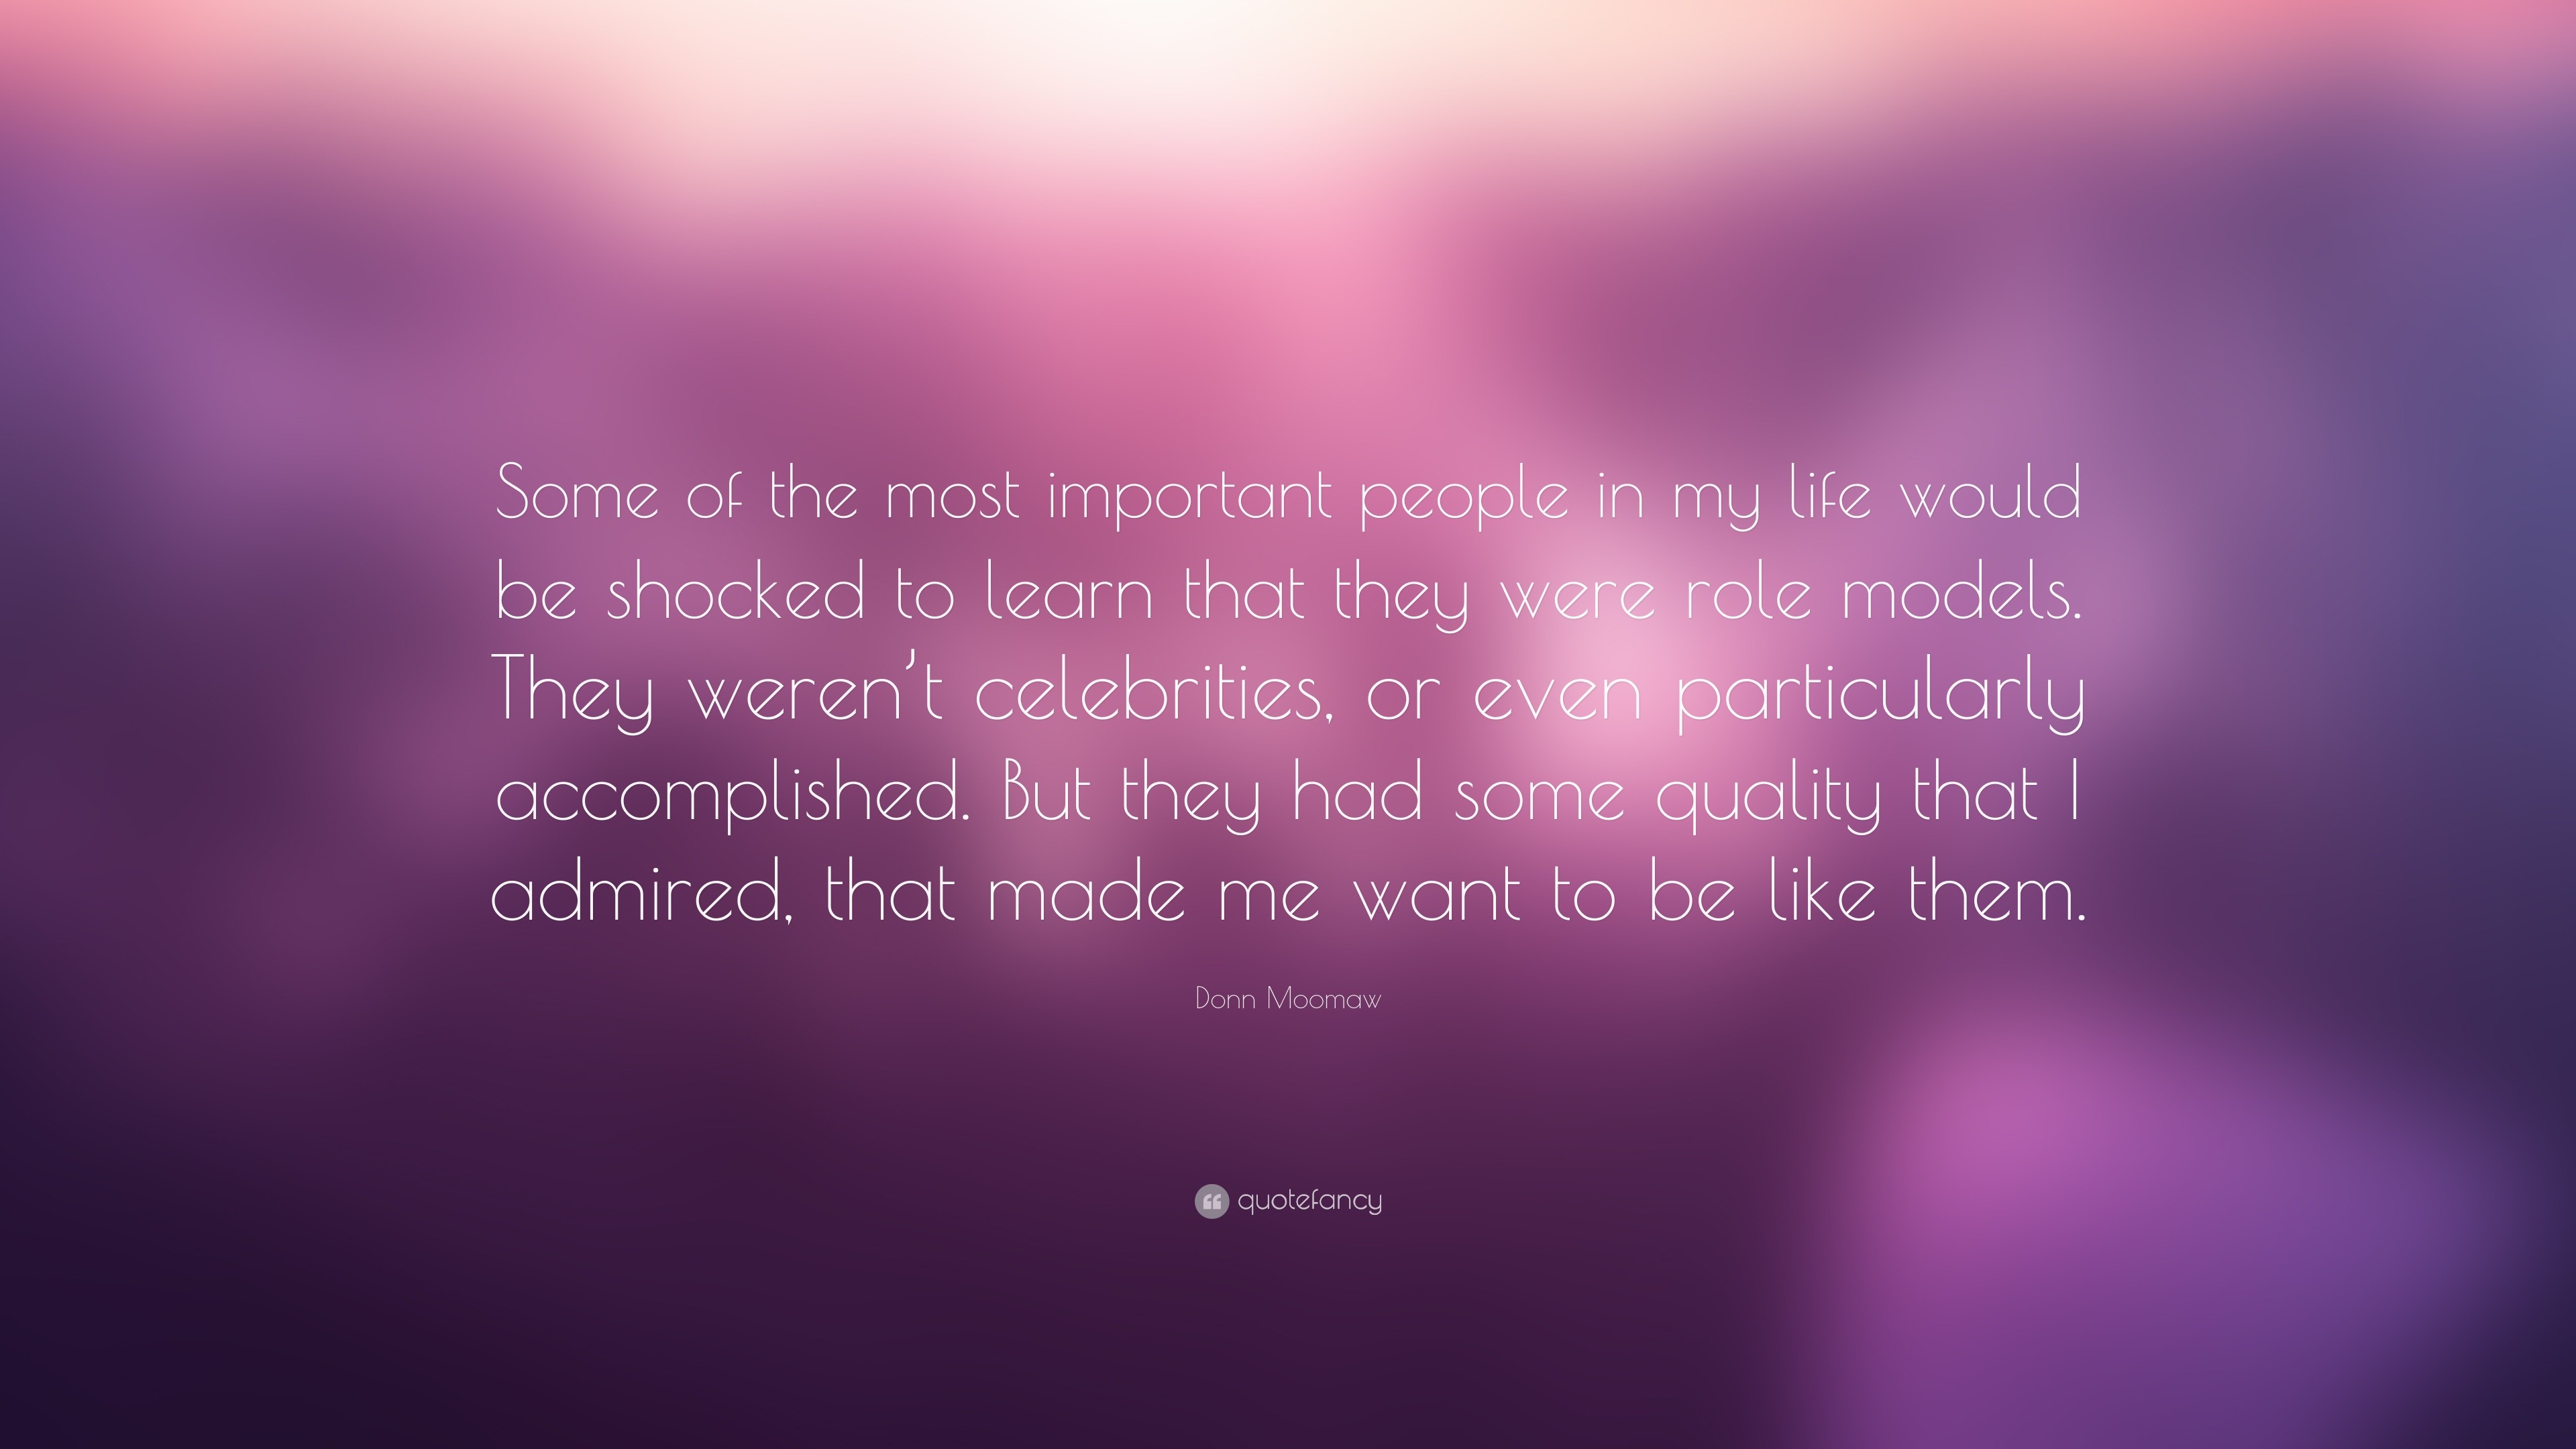 Donn Moomaw Quote “Some of the most important people in my life would be